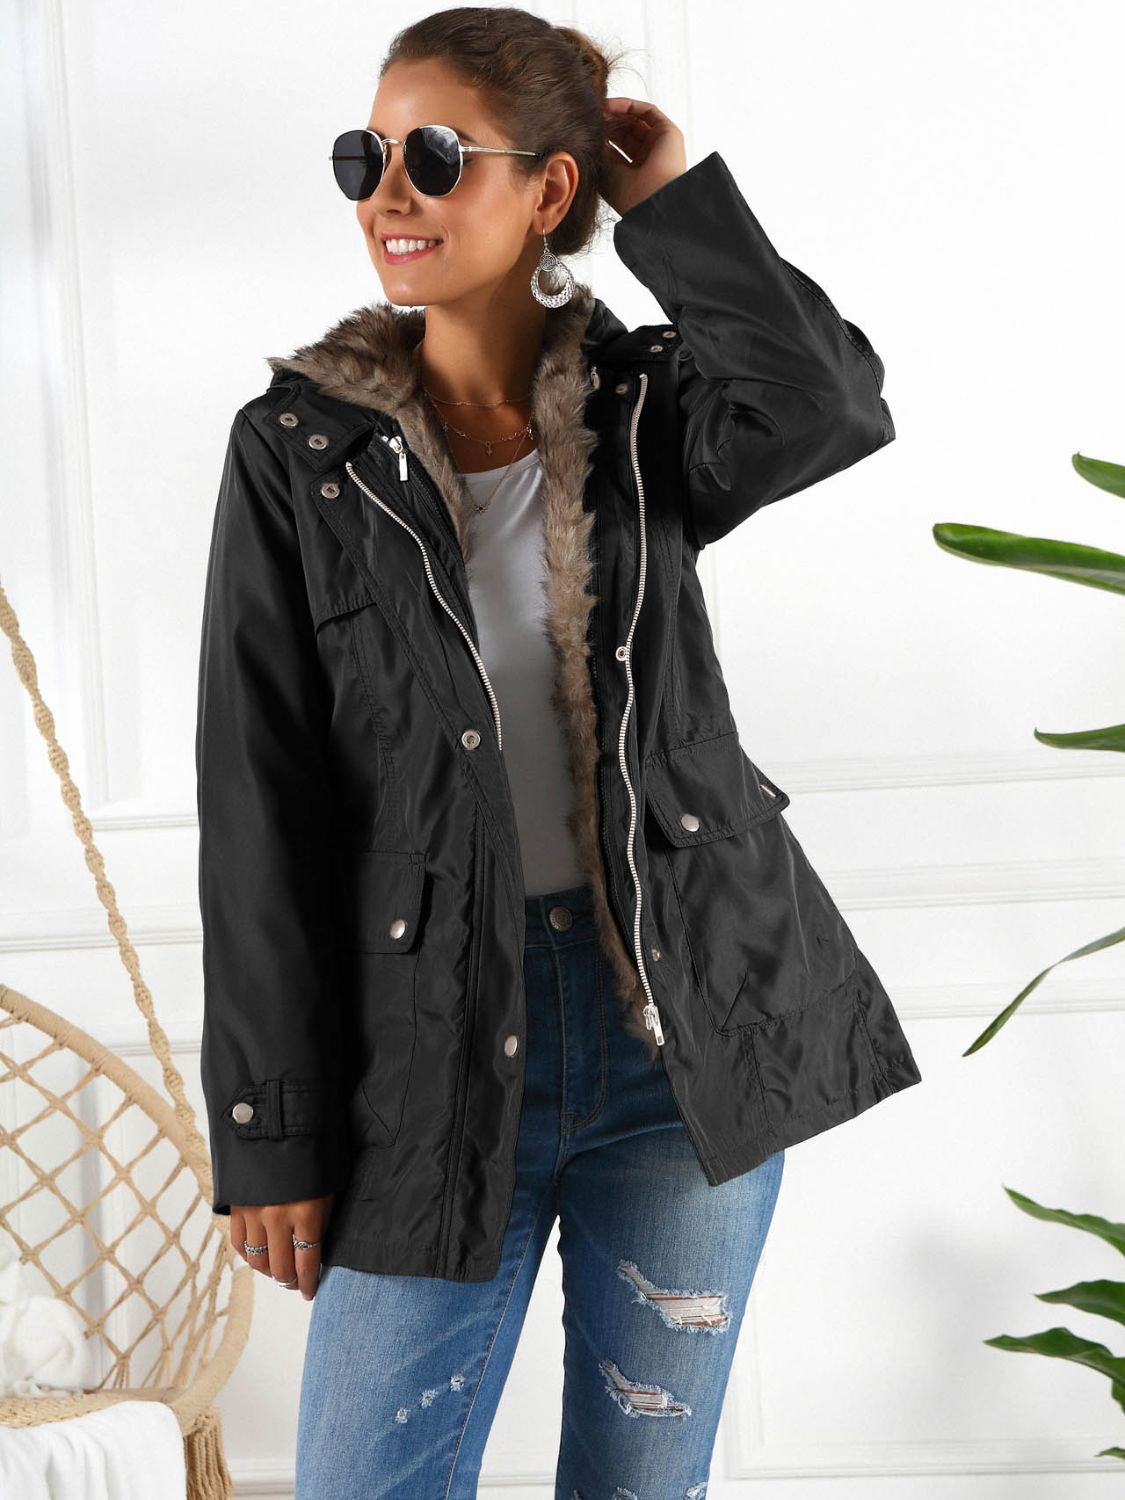 Full Size Hooded Jacket with Detachable Liner (Three-Way Wear)